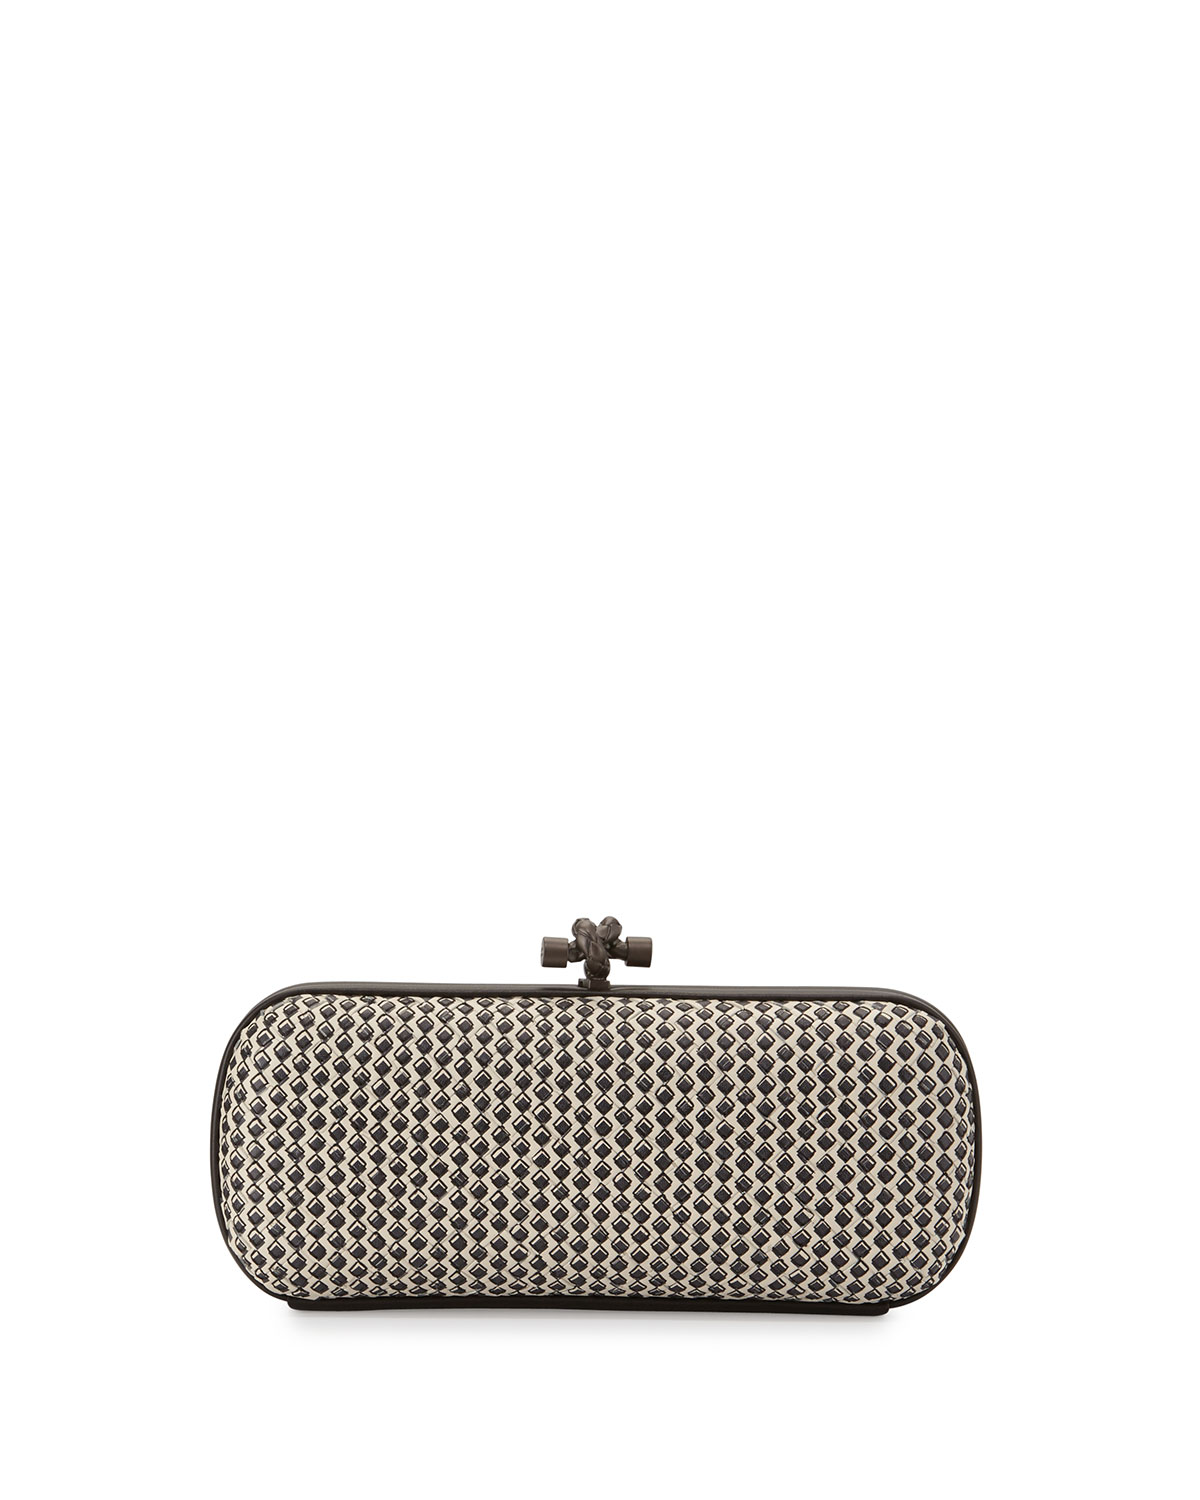 Small Stretch Knot Clutch Bag, Off White/Black